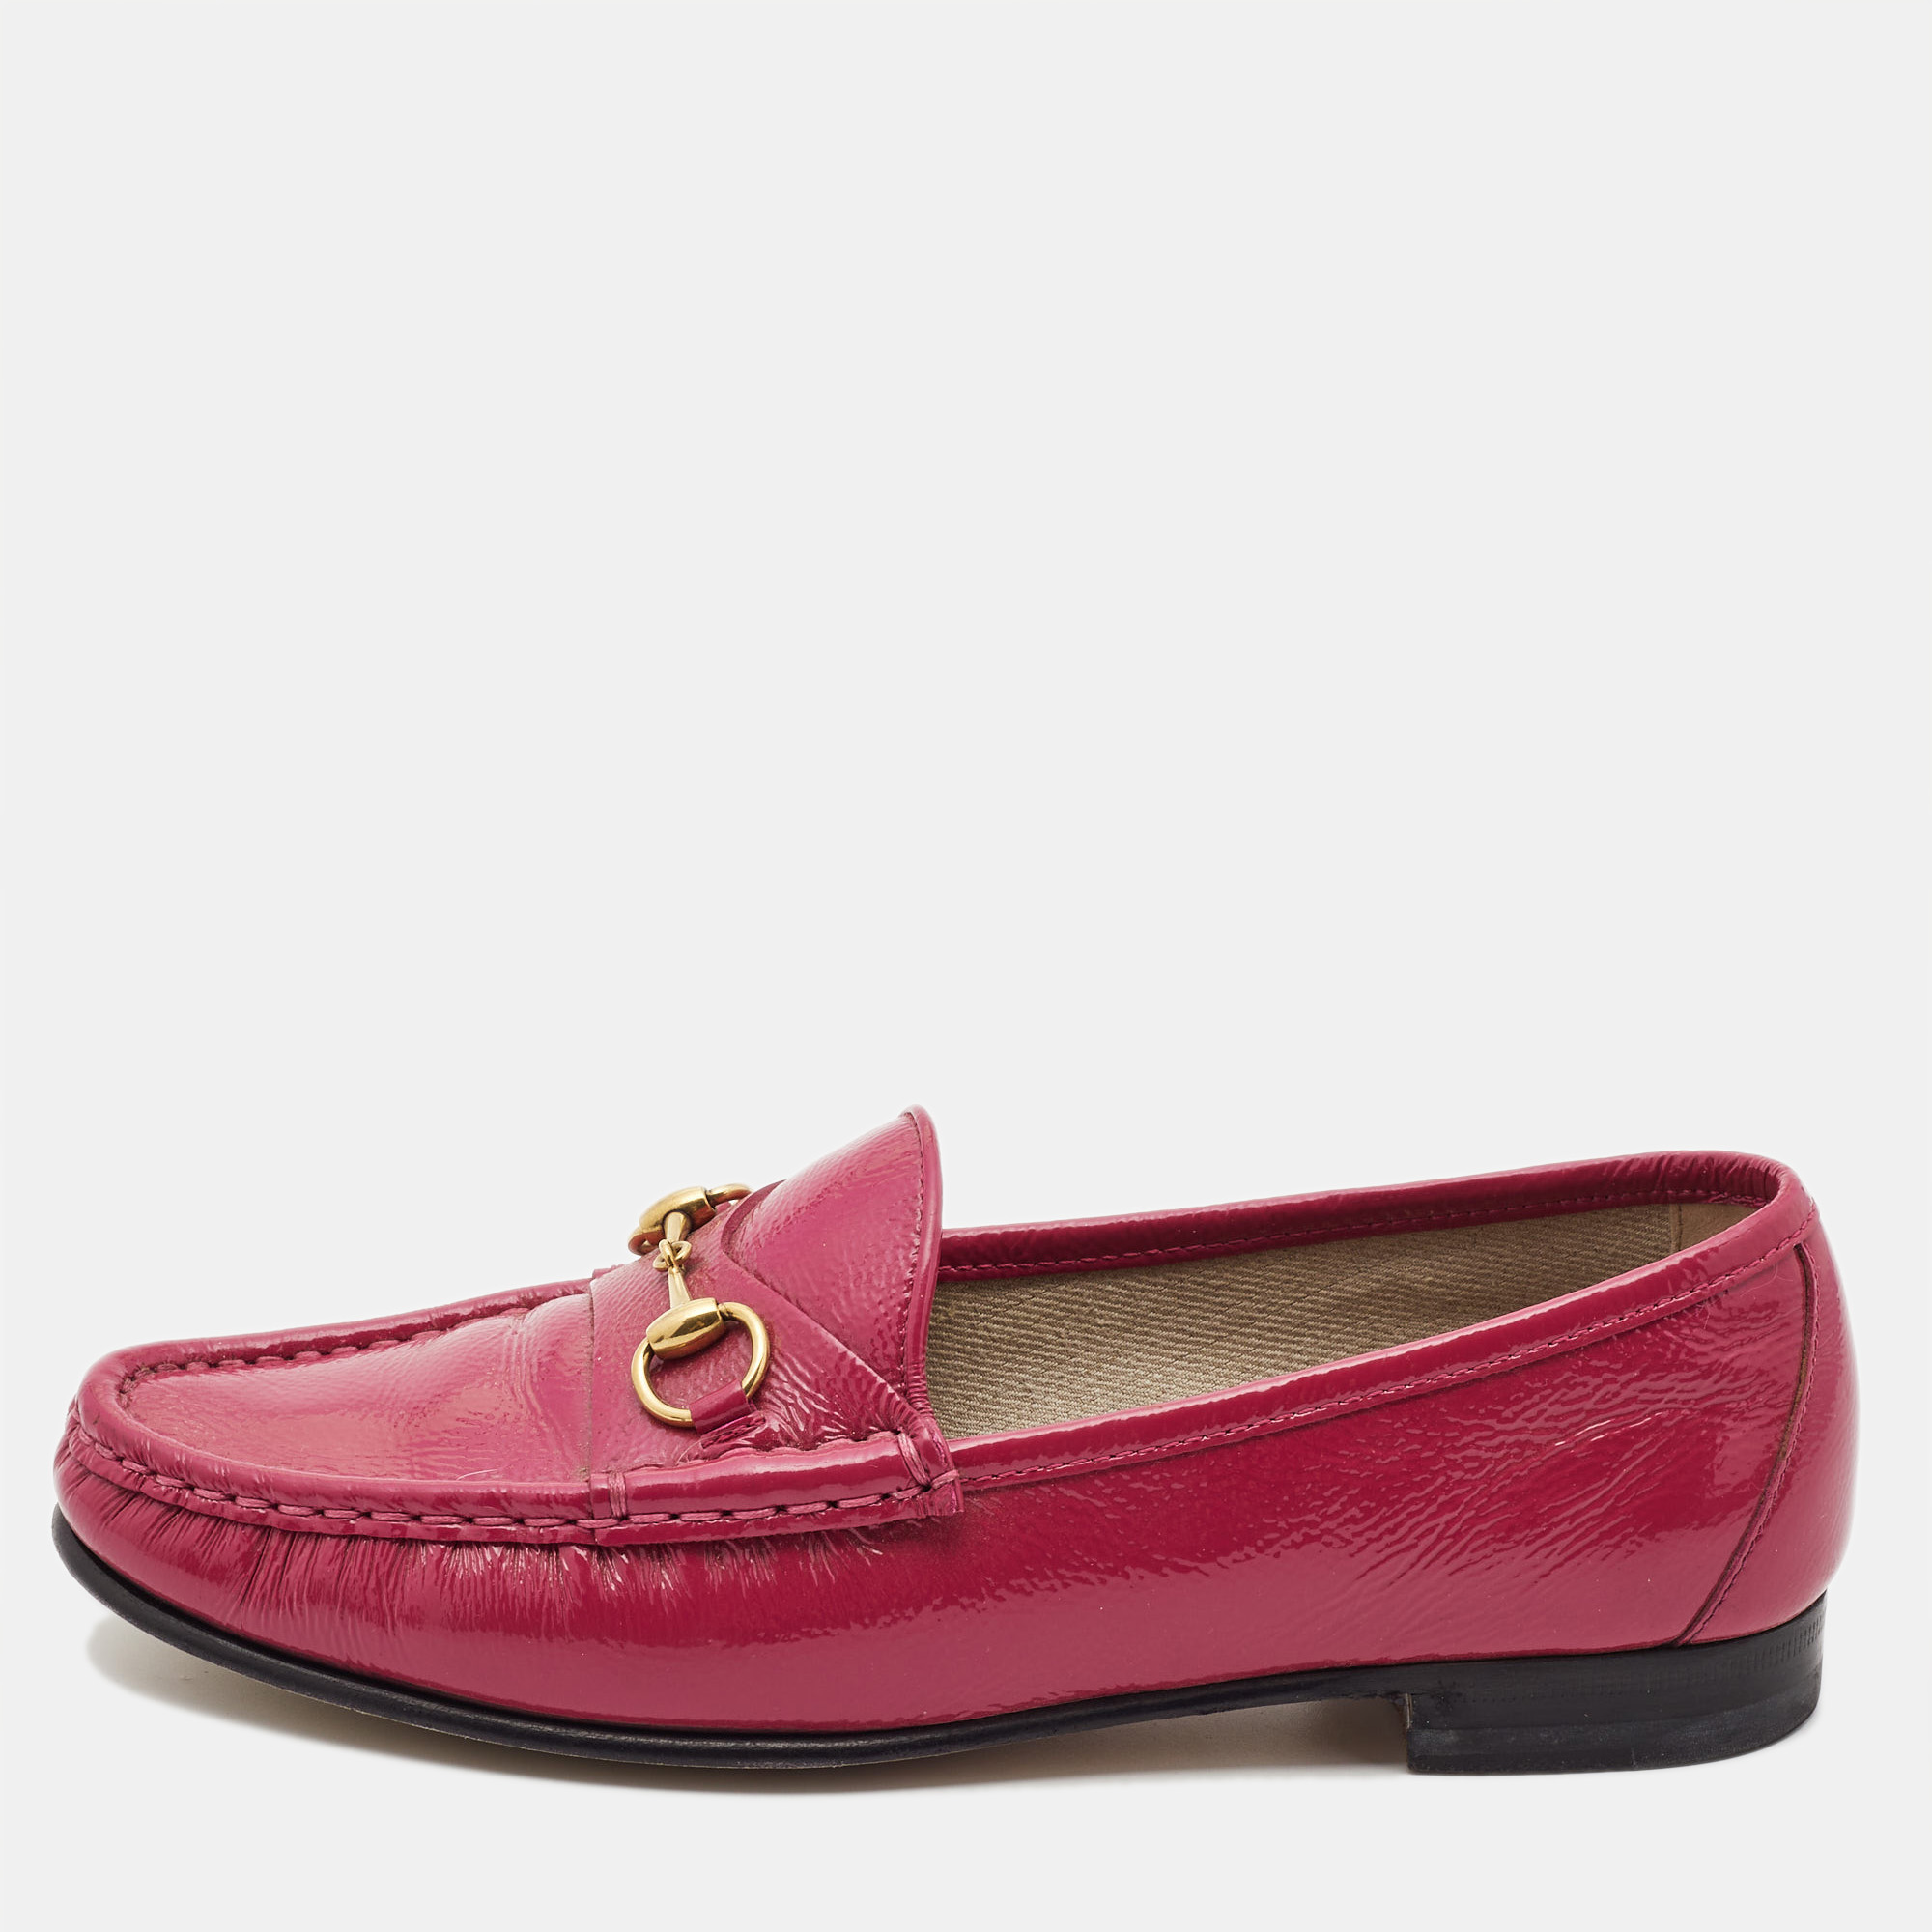 Gucci pink patent leather 1953 horsebit loafers size 37